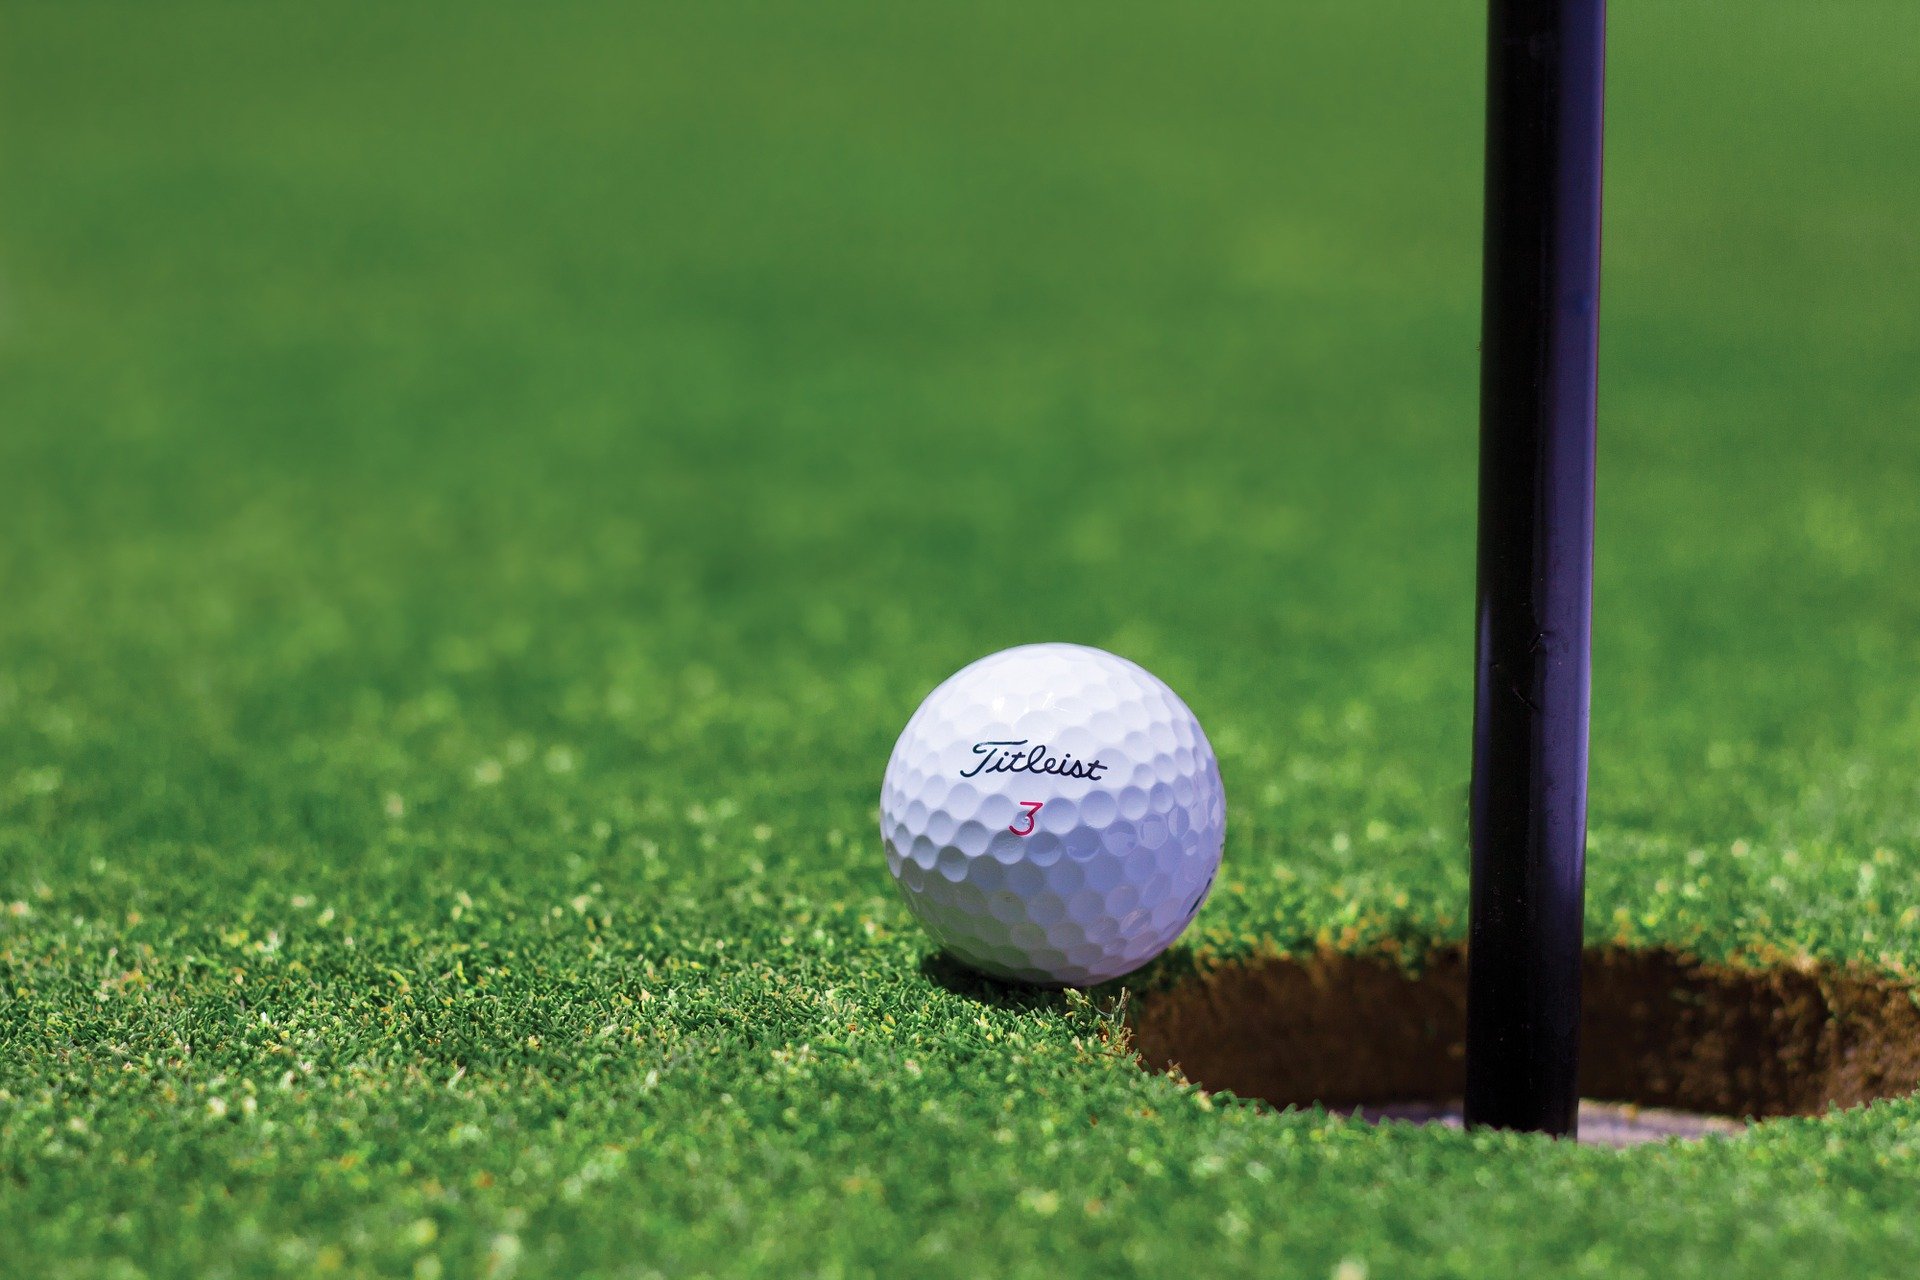 A golfball on the putting green